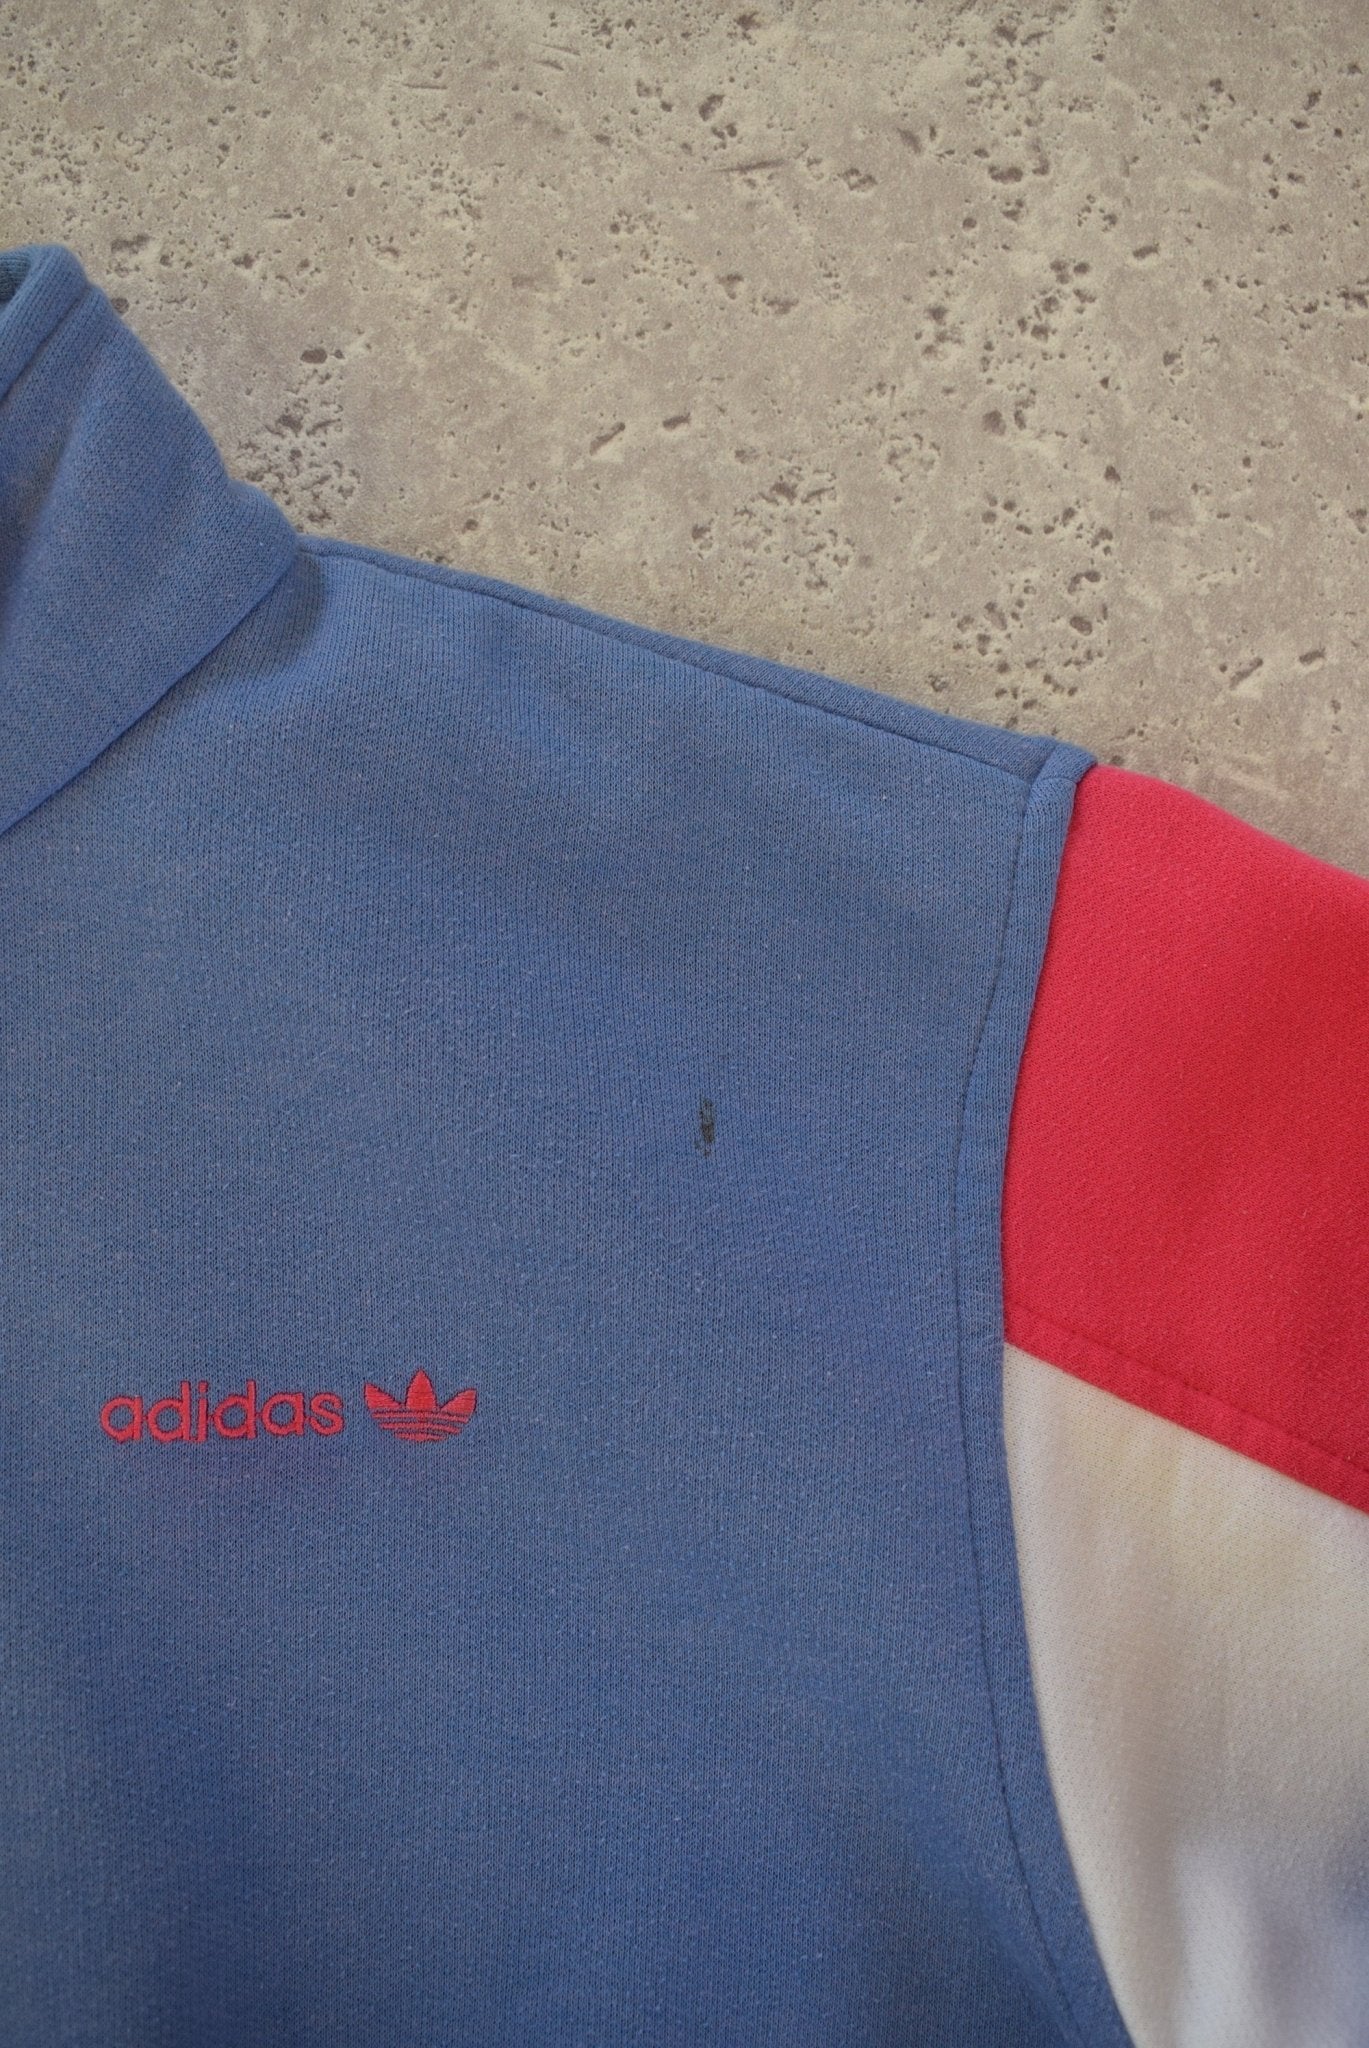 Vintage 90s Adidas Embroidered Fill Zip Sweater (S) - Retrospective Store